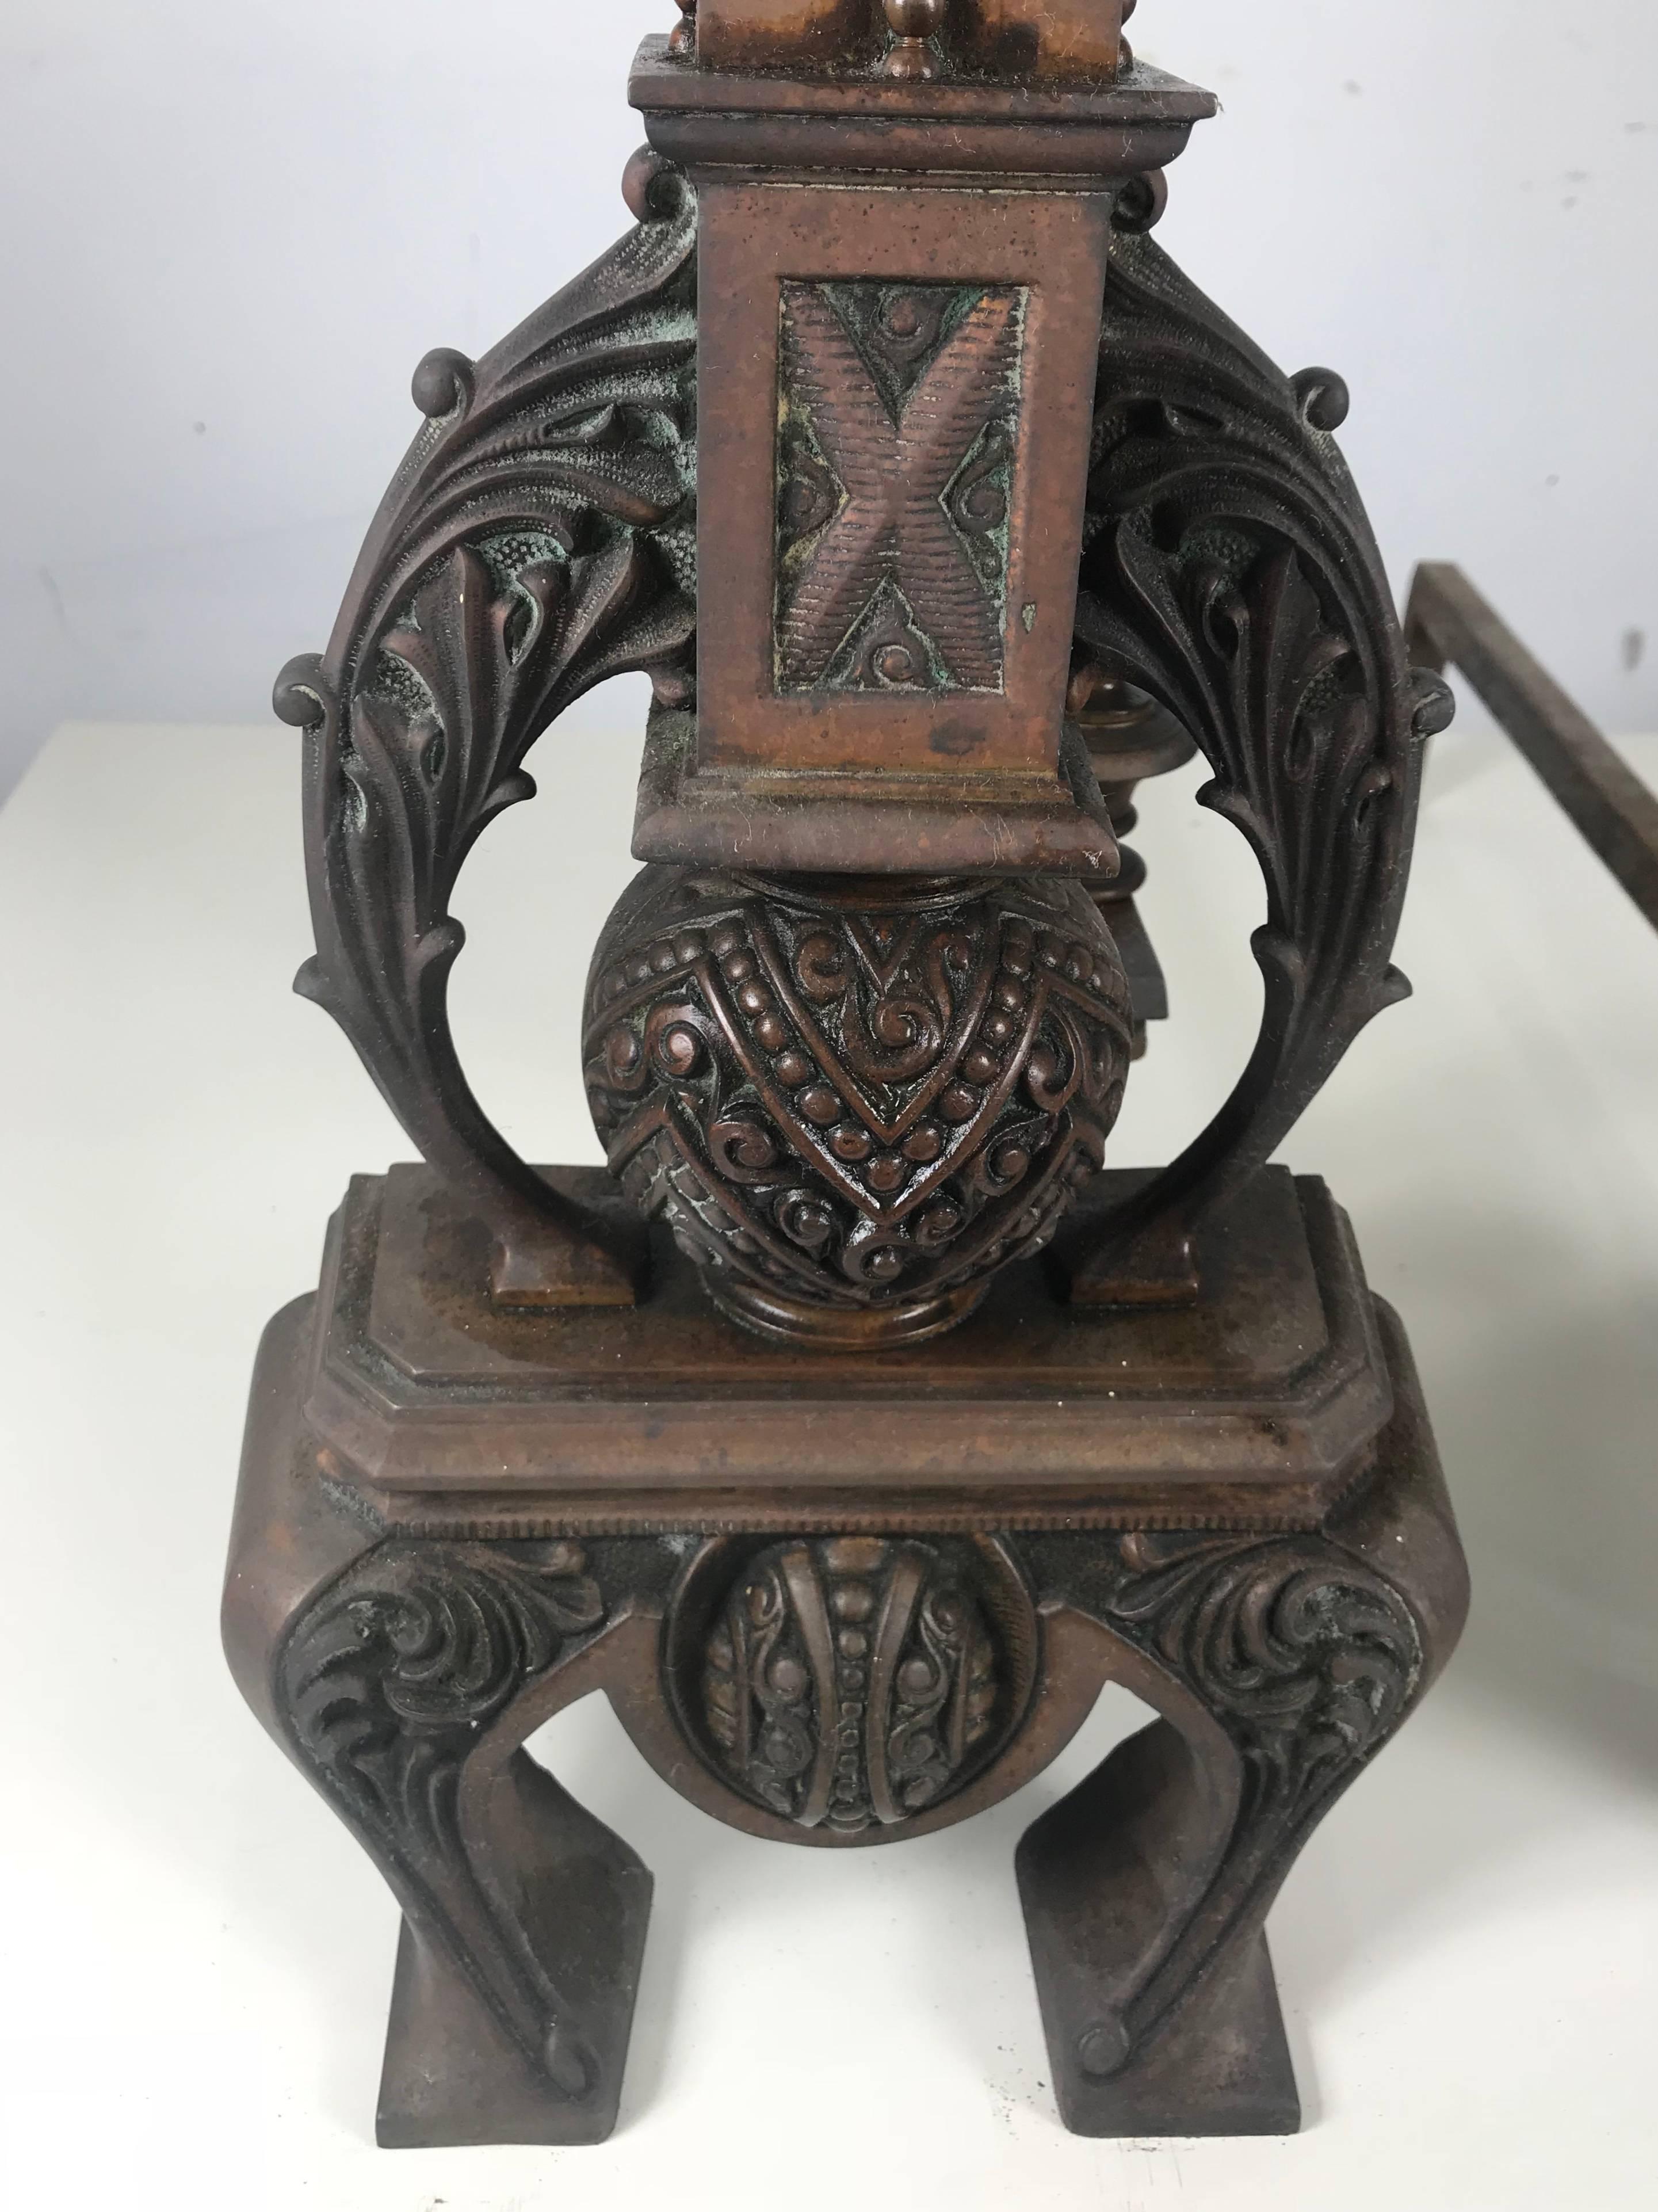 Stunning, 1890s F.G. Janusch N Y Bronze Fireplace Andirons. Transitional high style Victorian, arts and crafts design. Very reminiscent of famed Louis Sullivan designs.